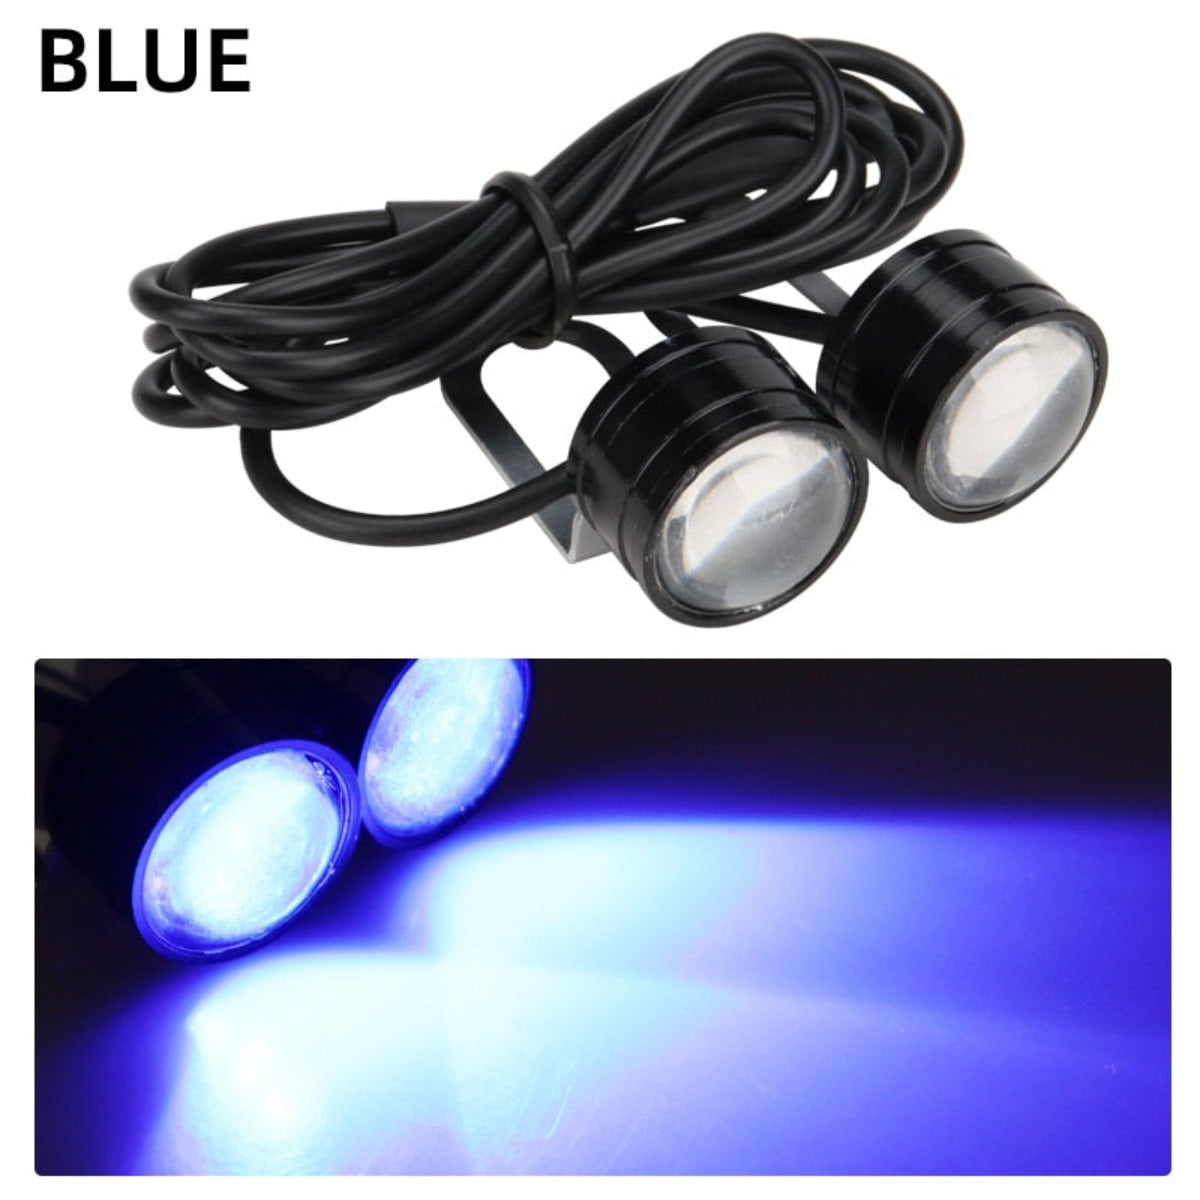 Enhance motorcycle safety with a pair of Motorcycle Strobe LED Driving Lights for increased visibility.